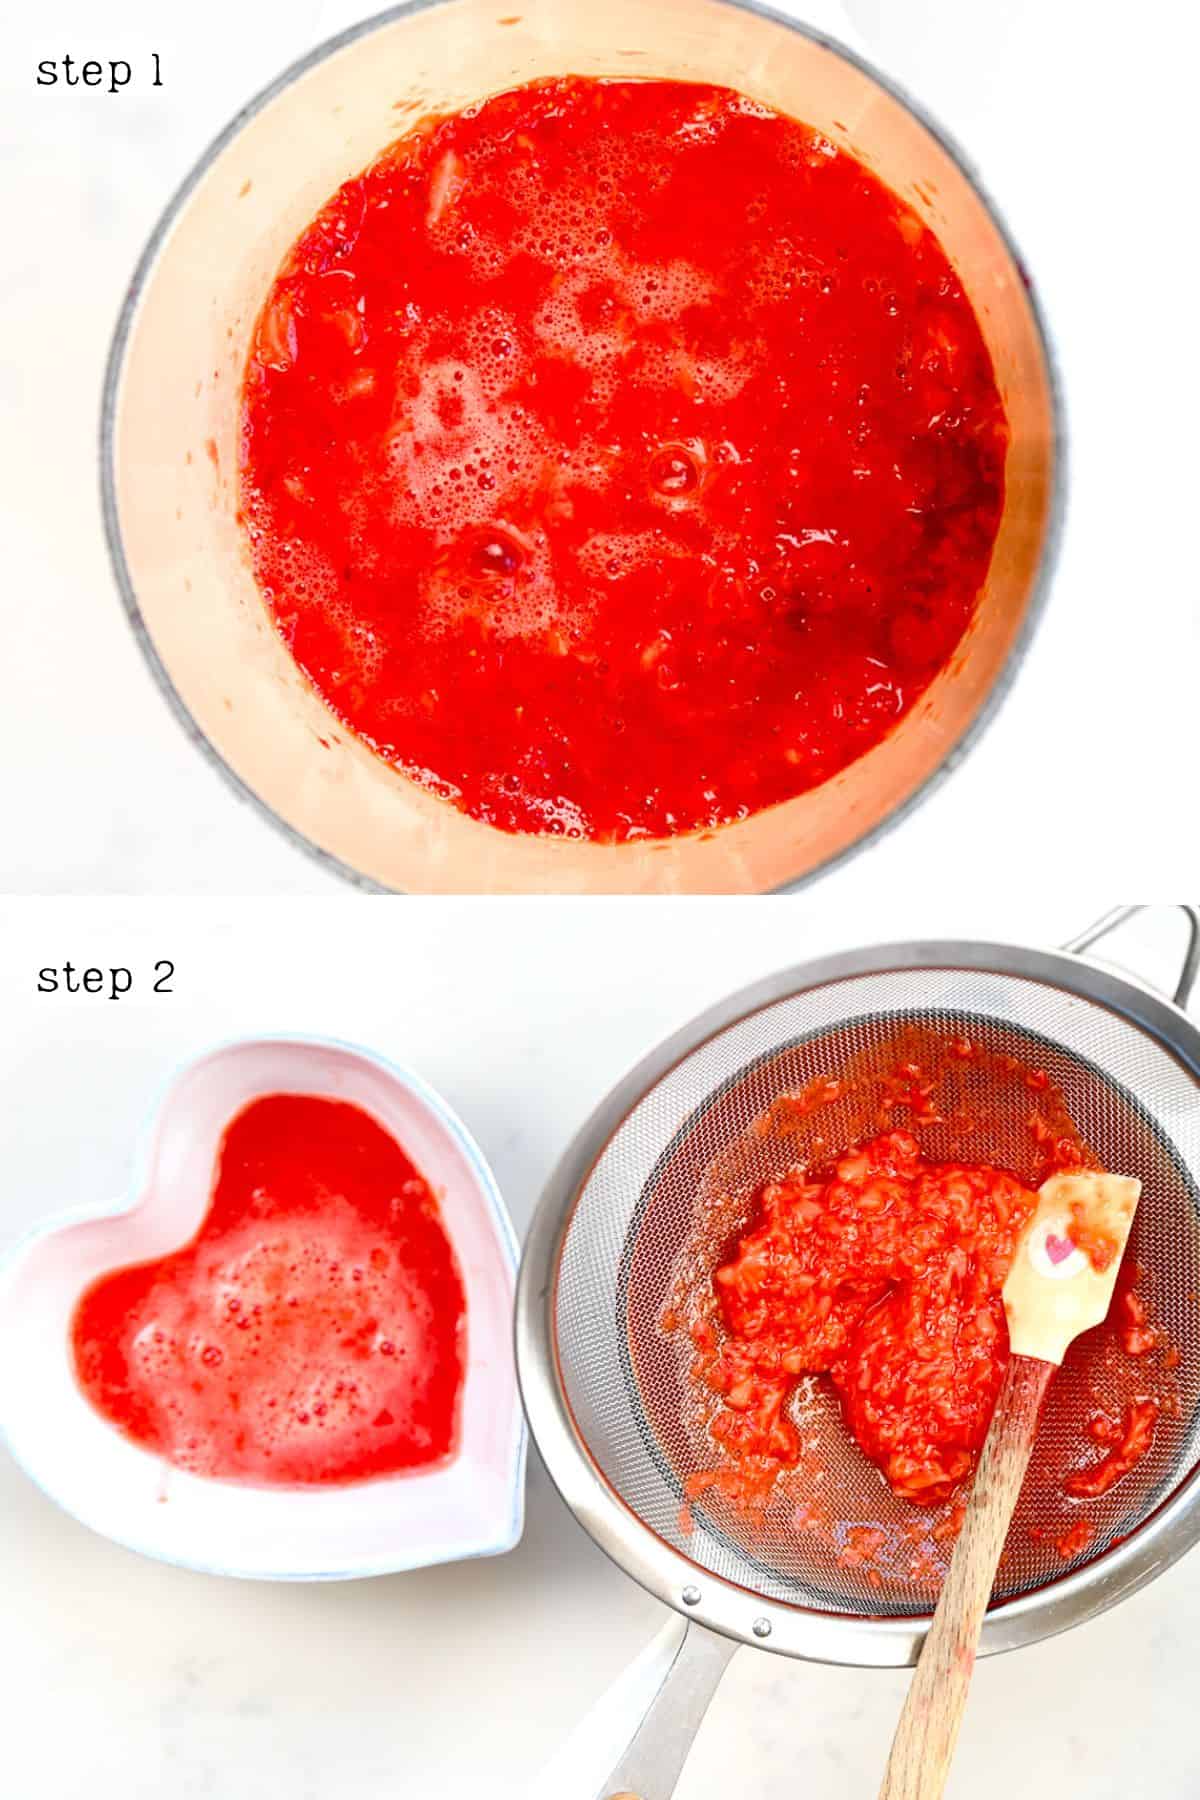 Steps for sieving mashed strawberries